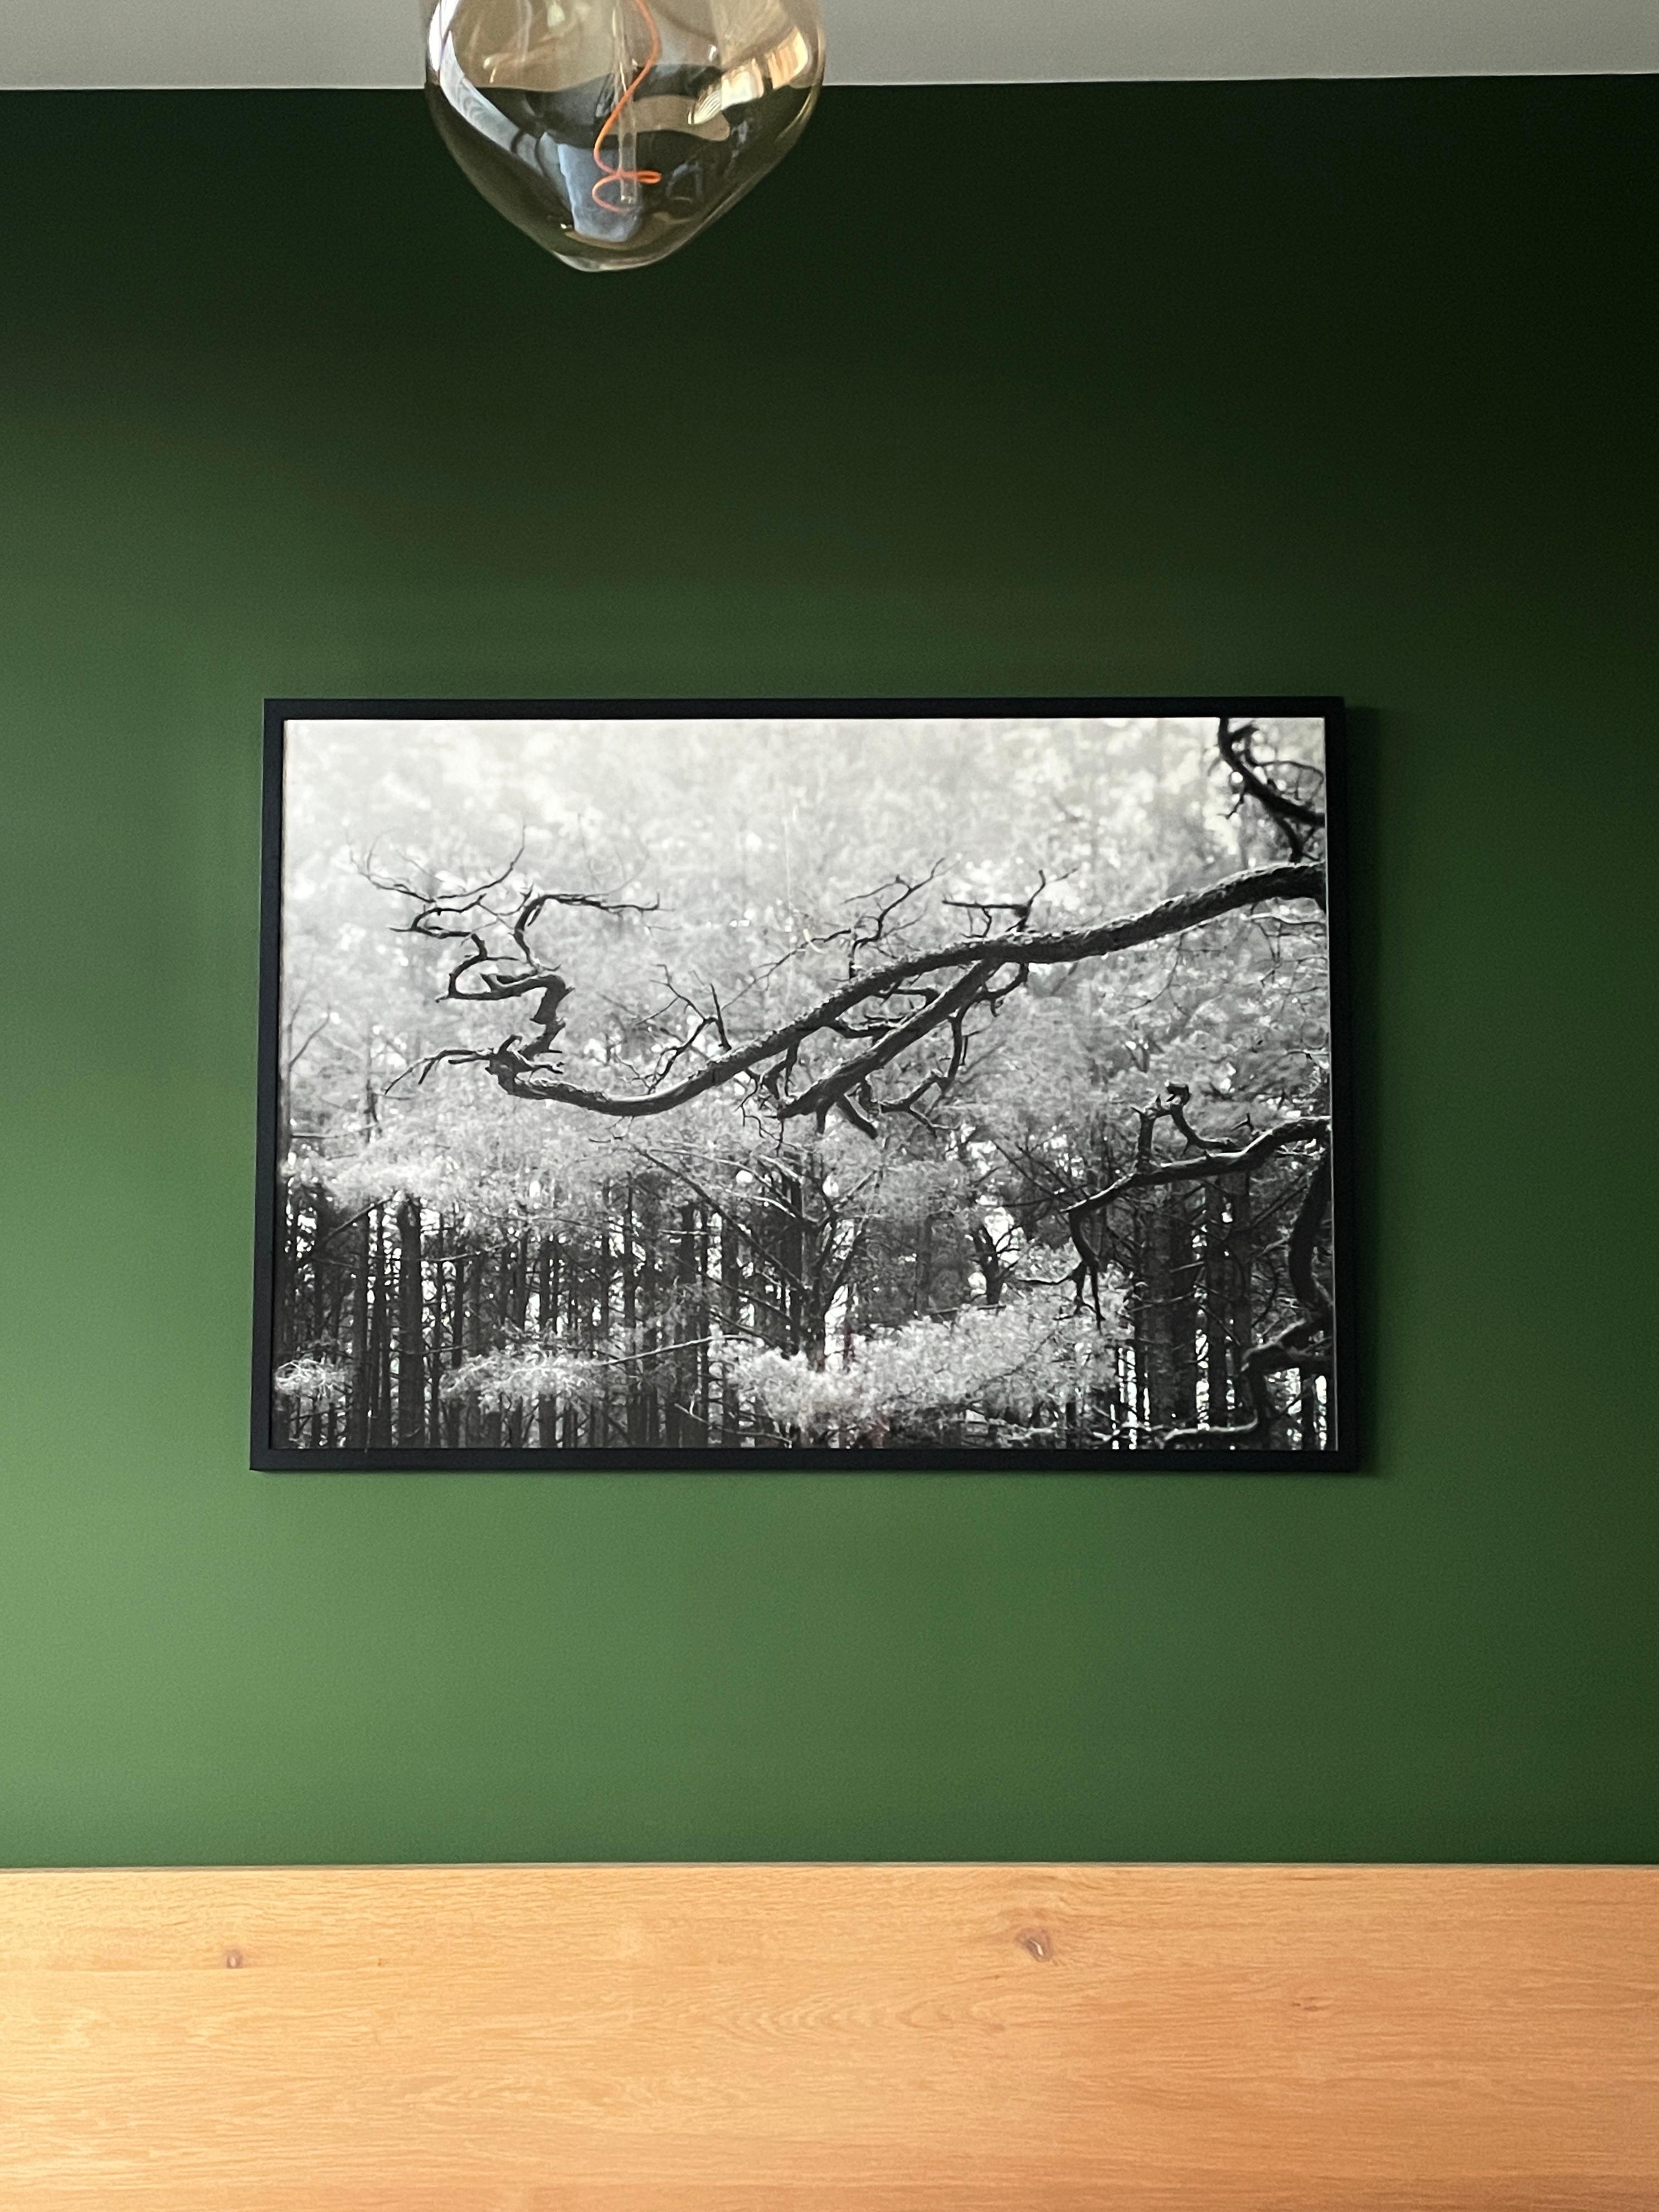 'Baltic pine' - black and white analogue forest photography 80x100cm Ltd. Ed. 10 - Naturalistic Photograph by Ugne Pouwell